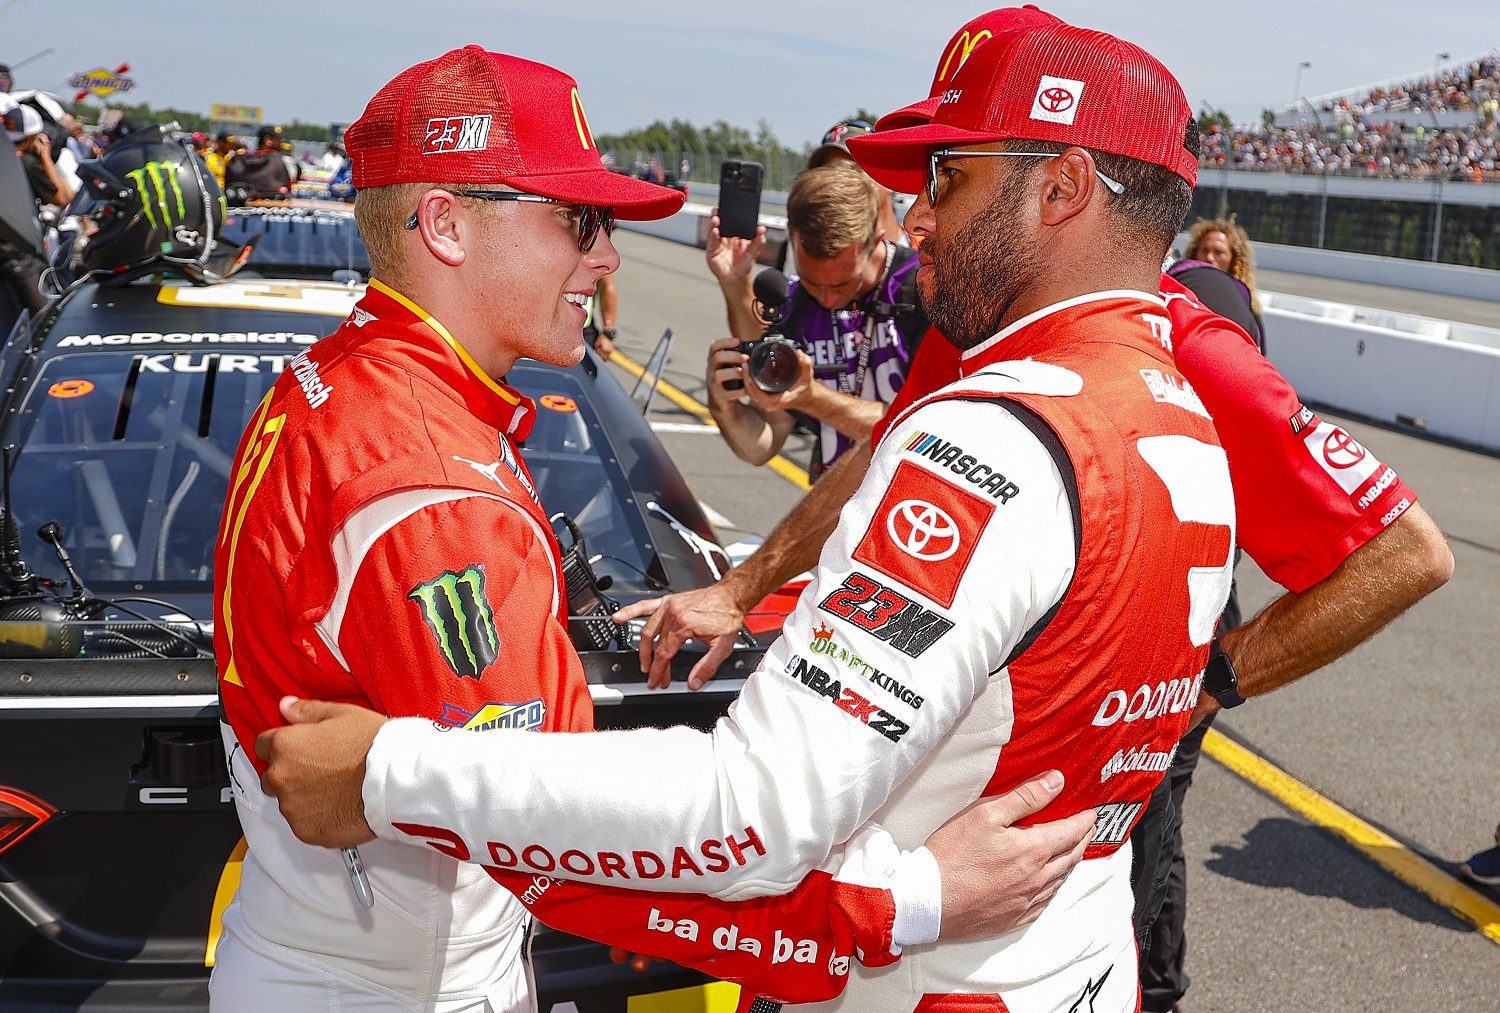 Ty Gibbs and Bubba Wallace talk on the grid prior to the NASCAR Cup Series M&M's Fan Appreciation 400 at Pocono Raceway on July 24, 2022.